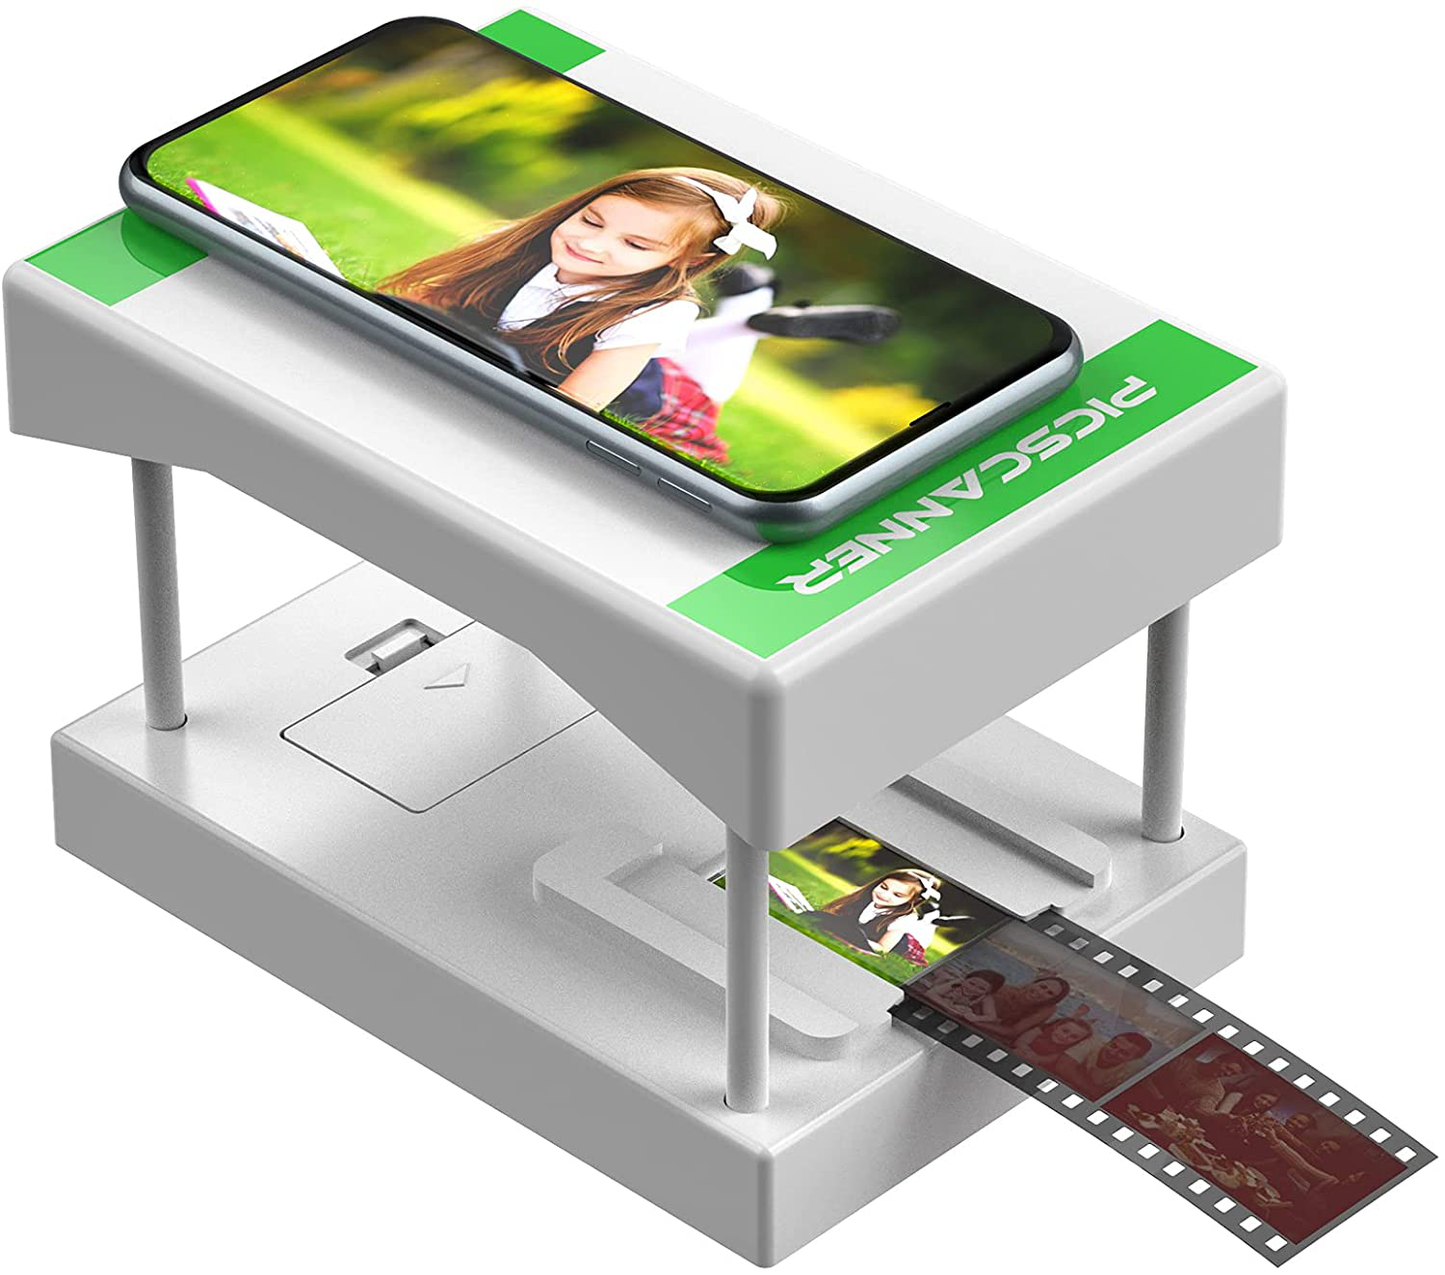 Mobile Film and Slide Scanner, Scan and Play 35mm Films & Slides Using Your Smartphone Camera